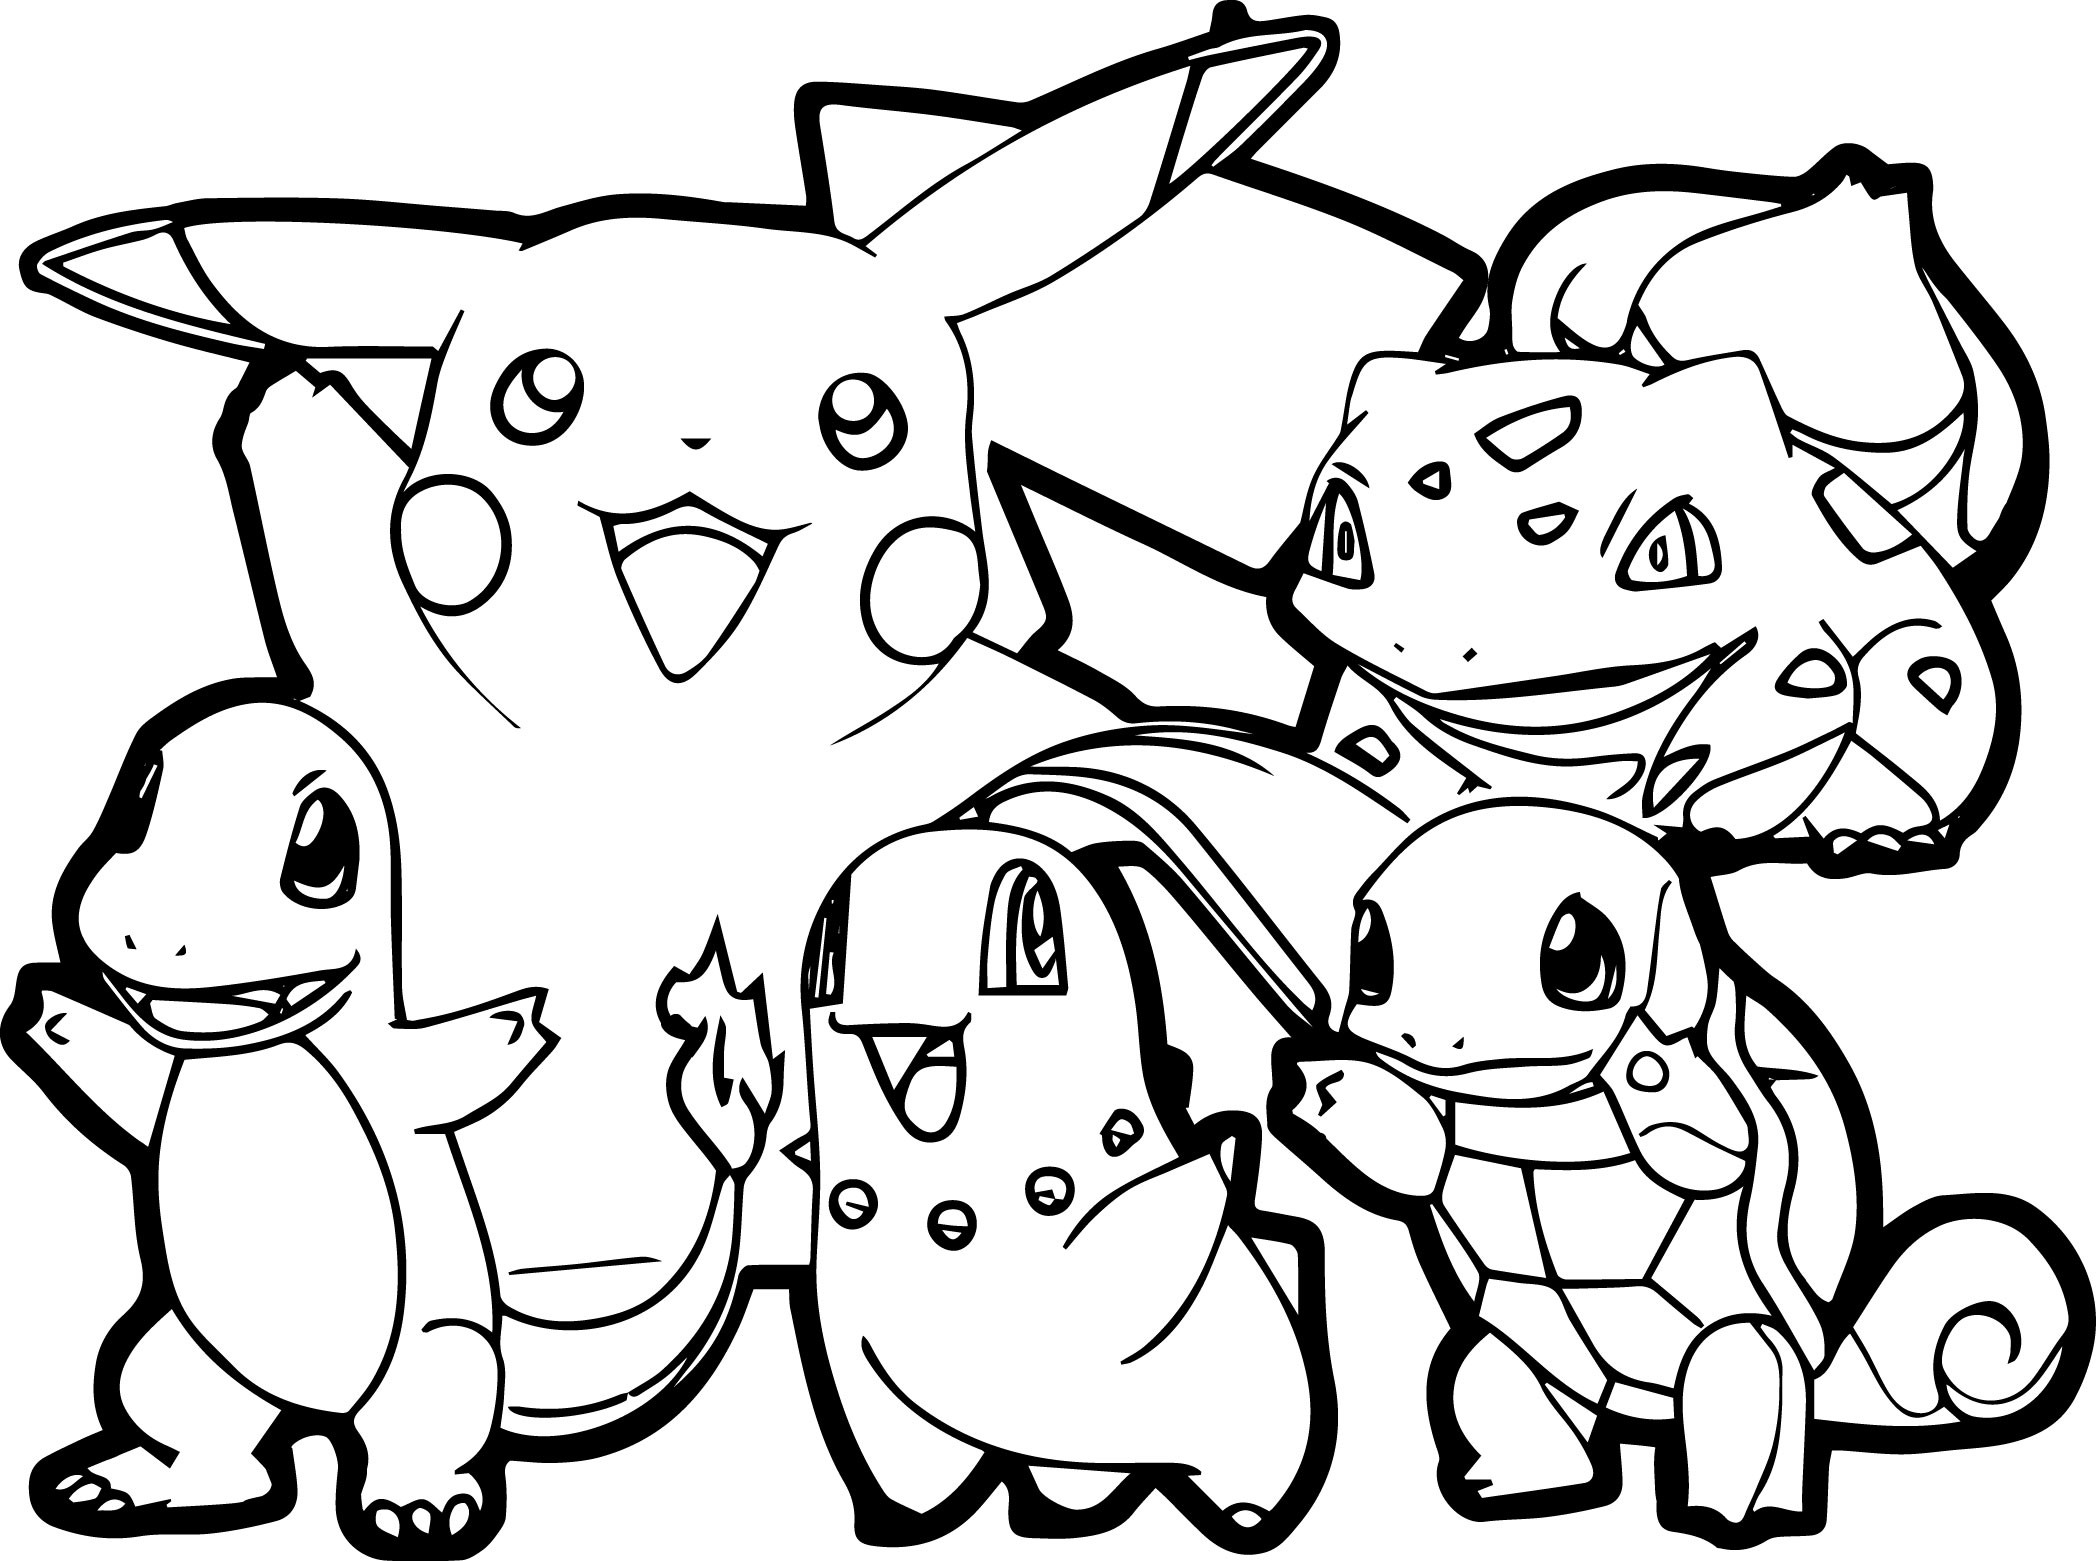 Kids Coloring Pages Pokemon
 Pokemon for children All Pokemon coloring pages Kids